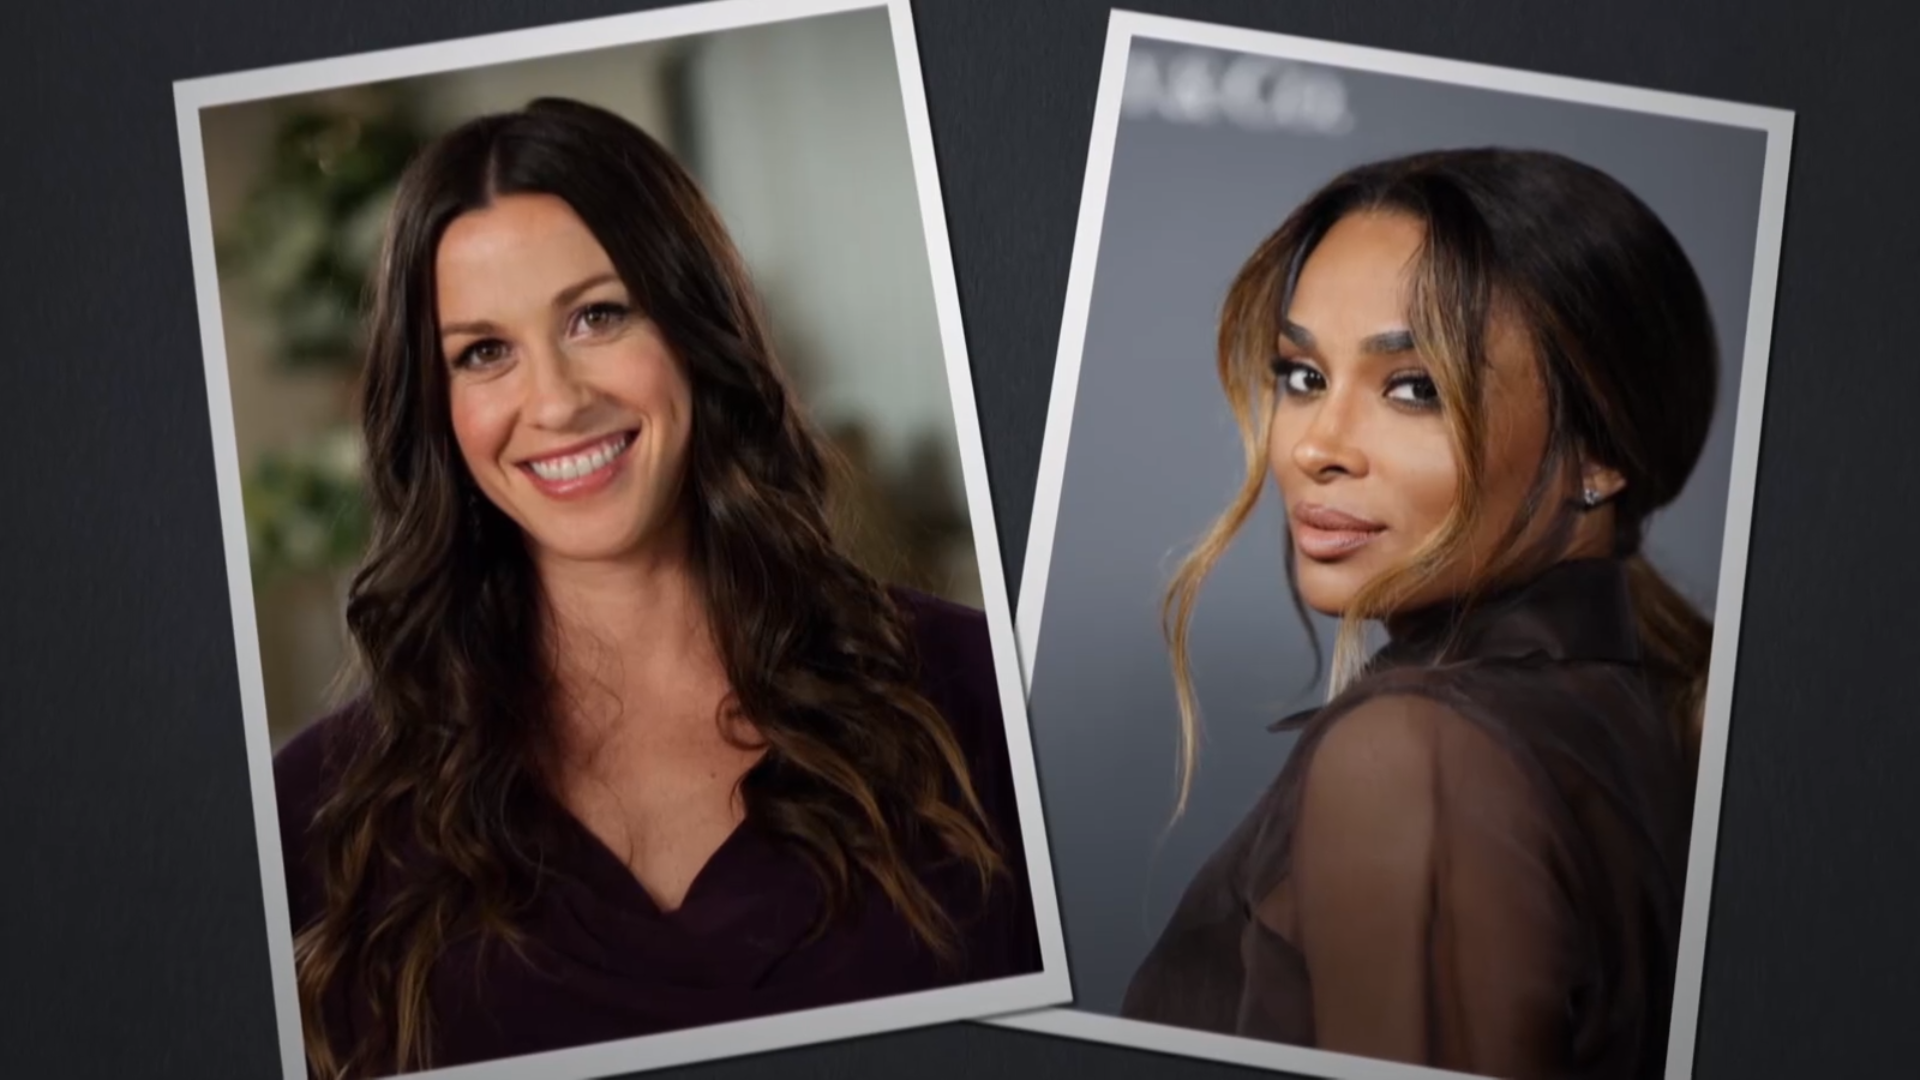 Ciara, Alanis Morissette learn they have already met their distant